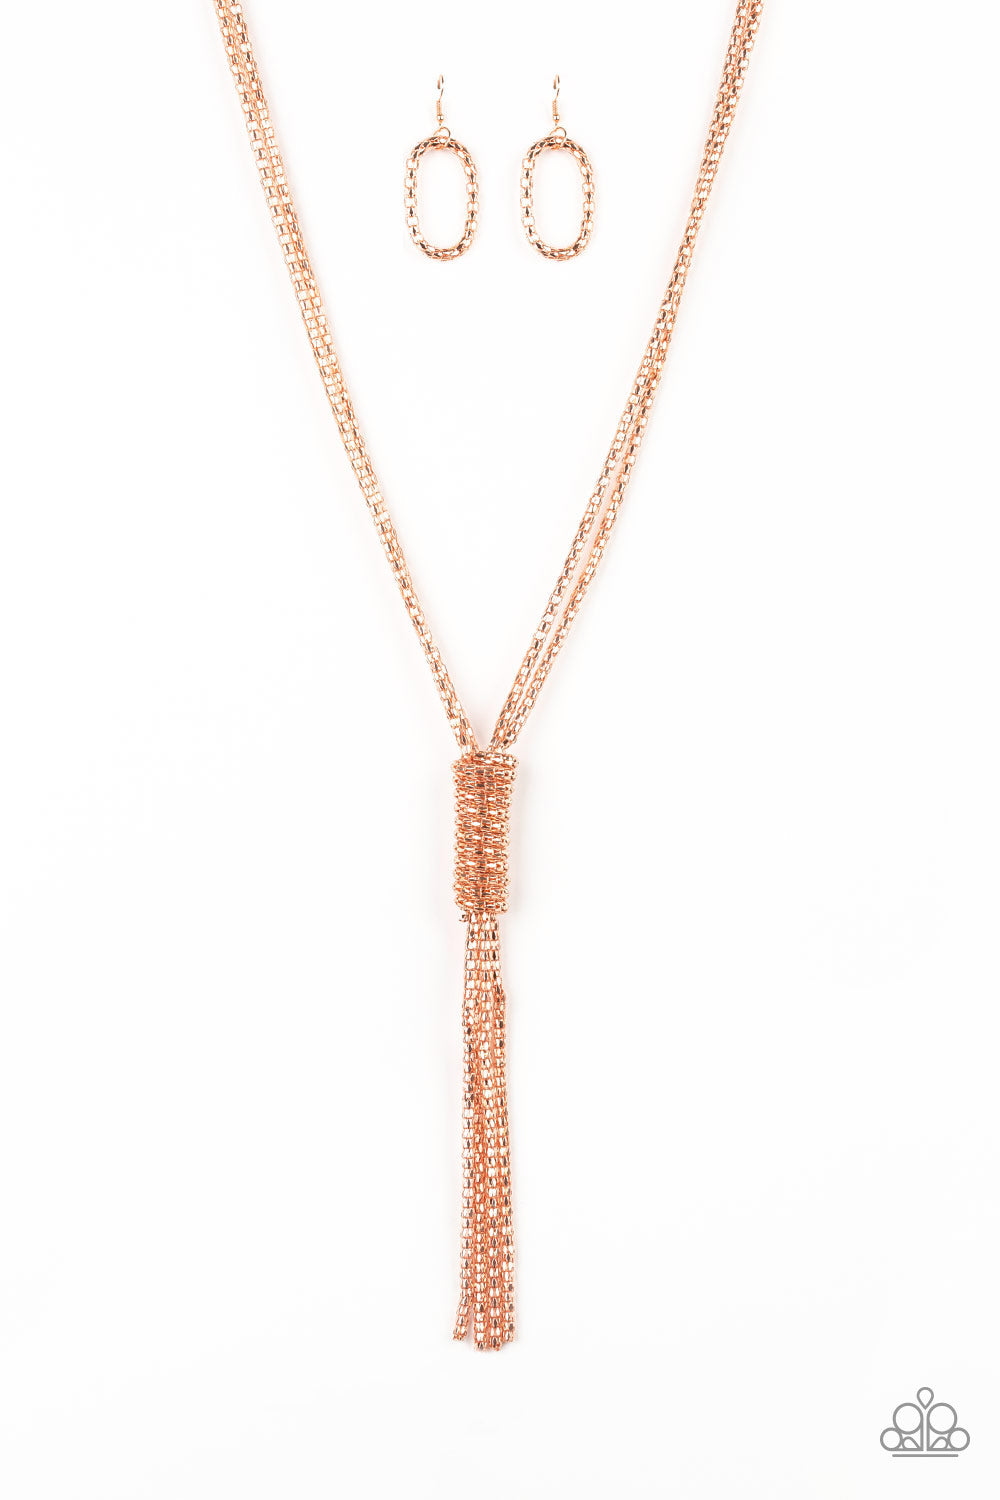 BOOM BOOM KNOCK YOU OUT!  -  COPPER NECKLACE